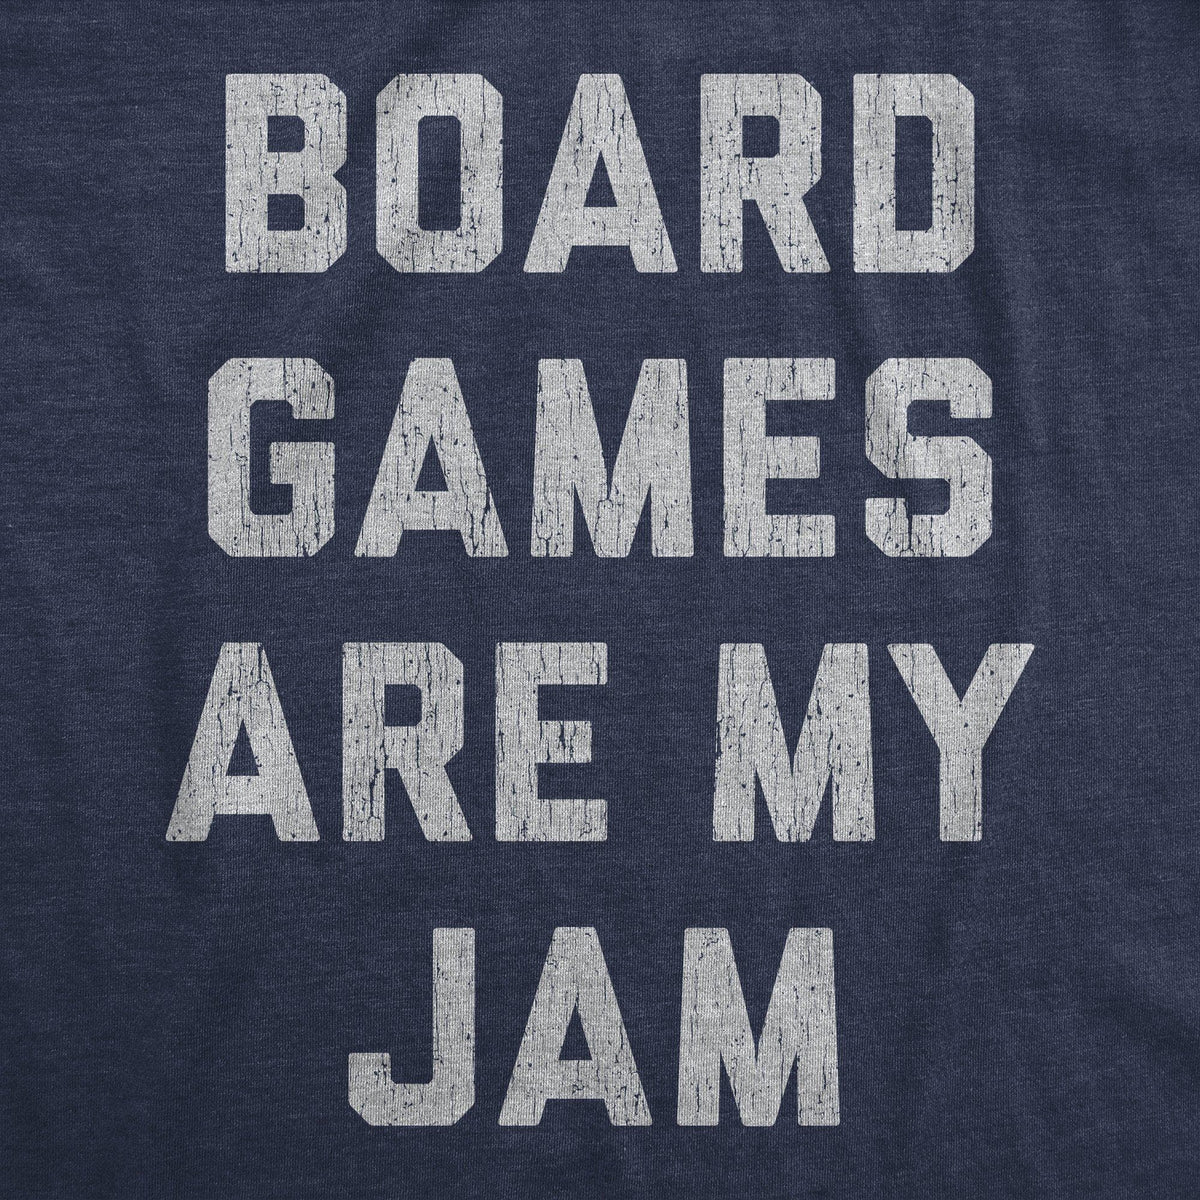 Board Games Are My Jam Men&#39;s Tshirt - Crazy Dog T-Shirts